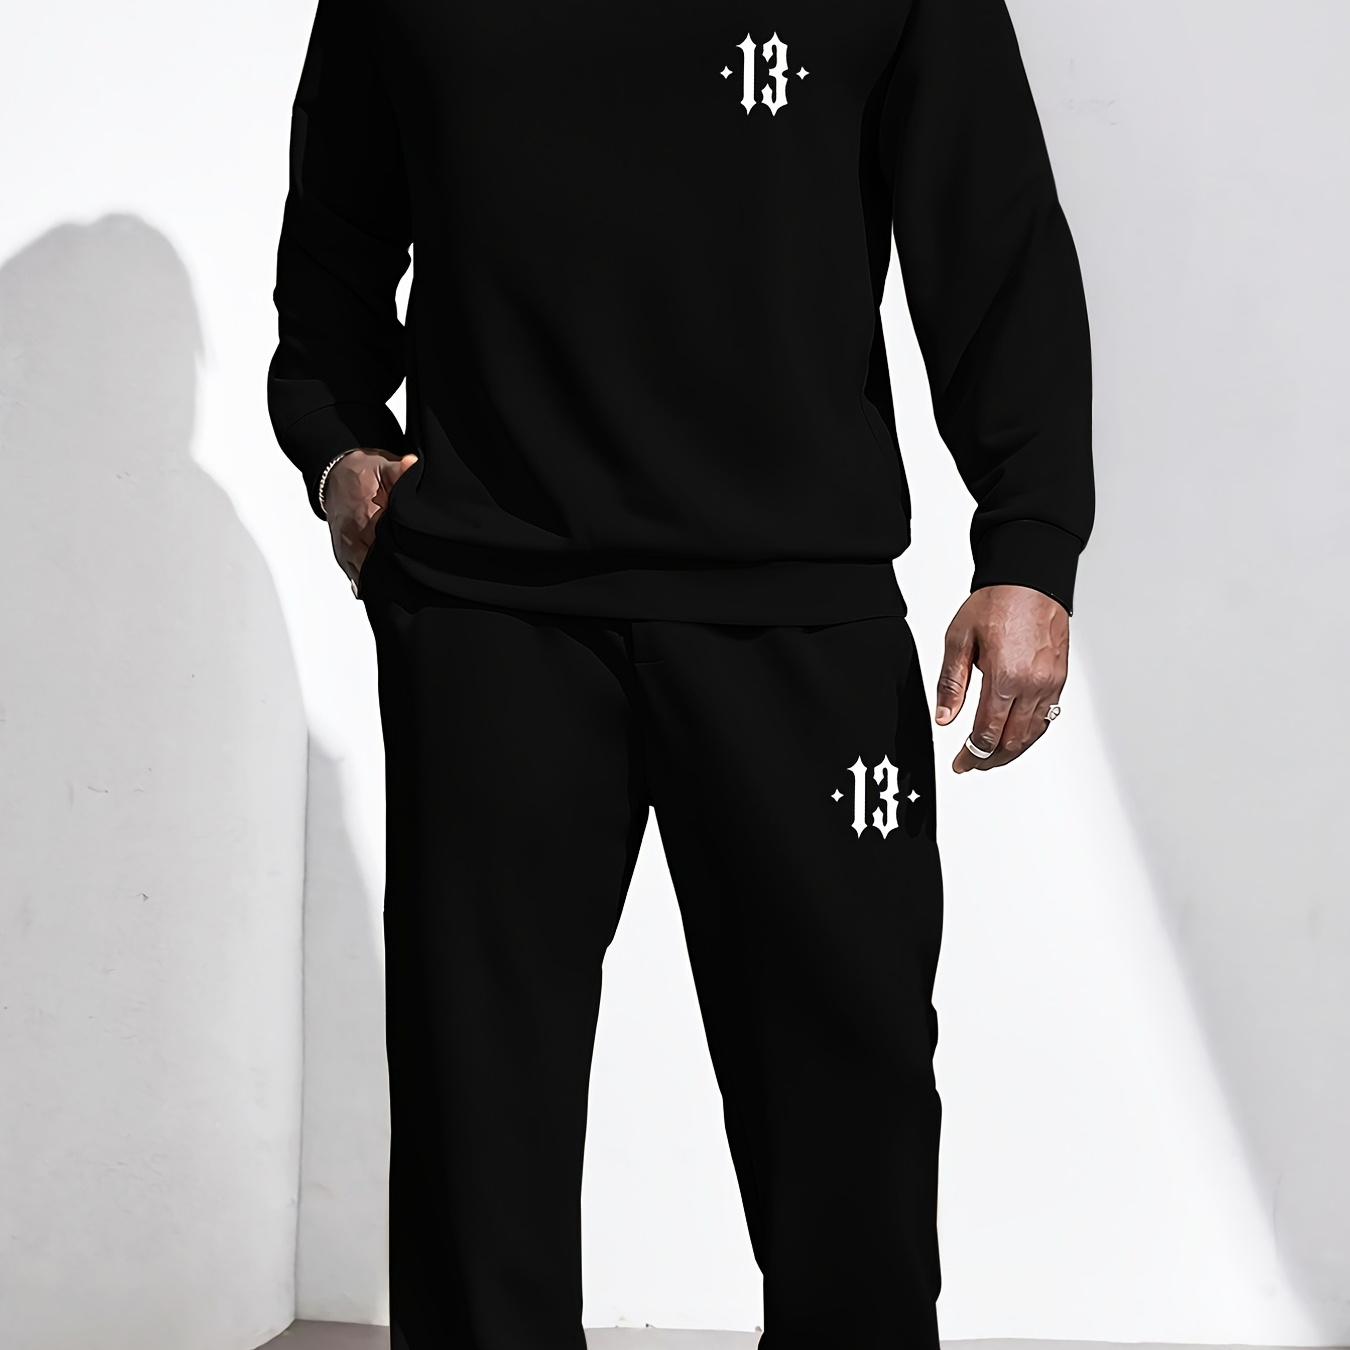 

Men's Creative Symbol Print Round Neck Casual Outfit Set, 2 Pieces Long Sleeve Pullover Sweatshirt And Drawstring Sweatpants